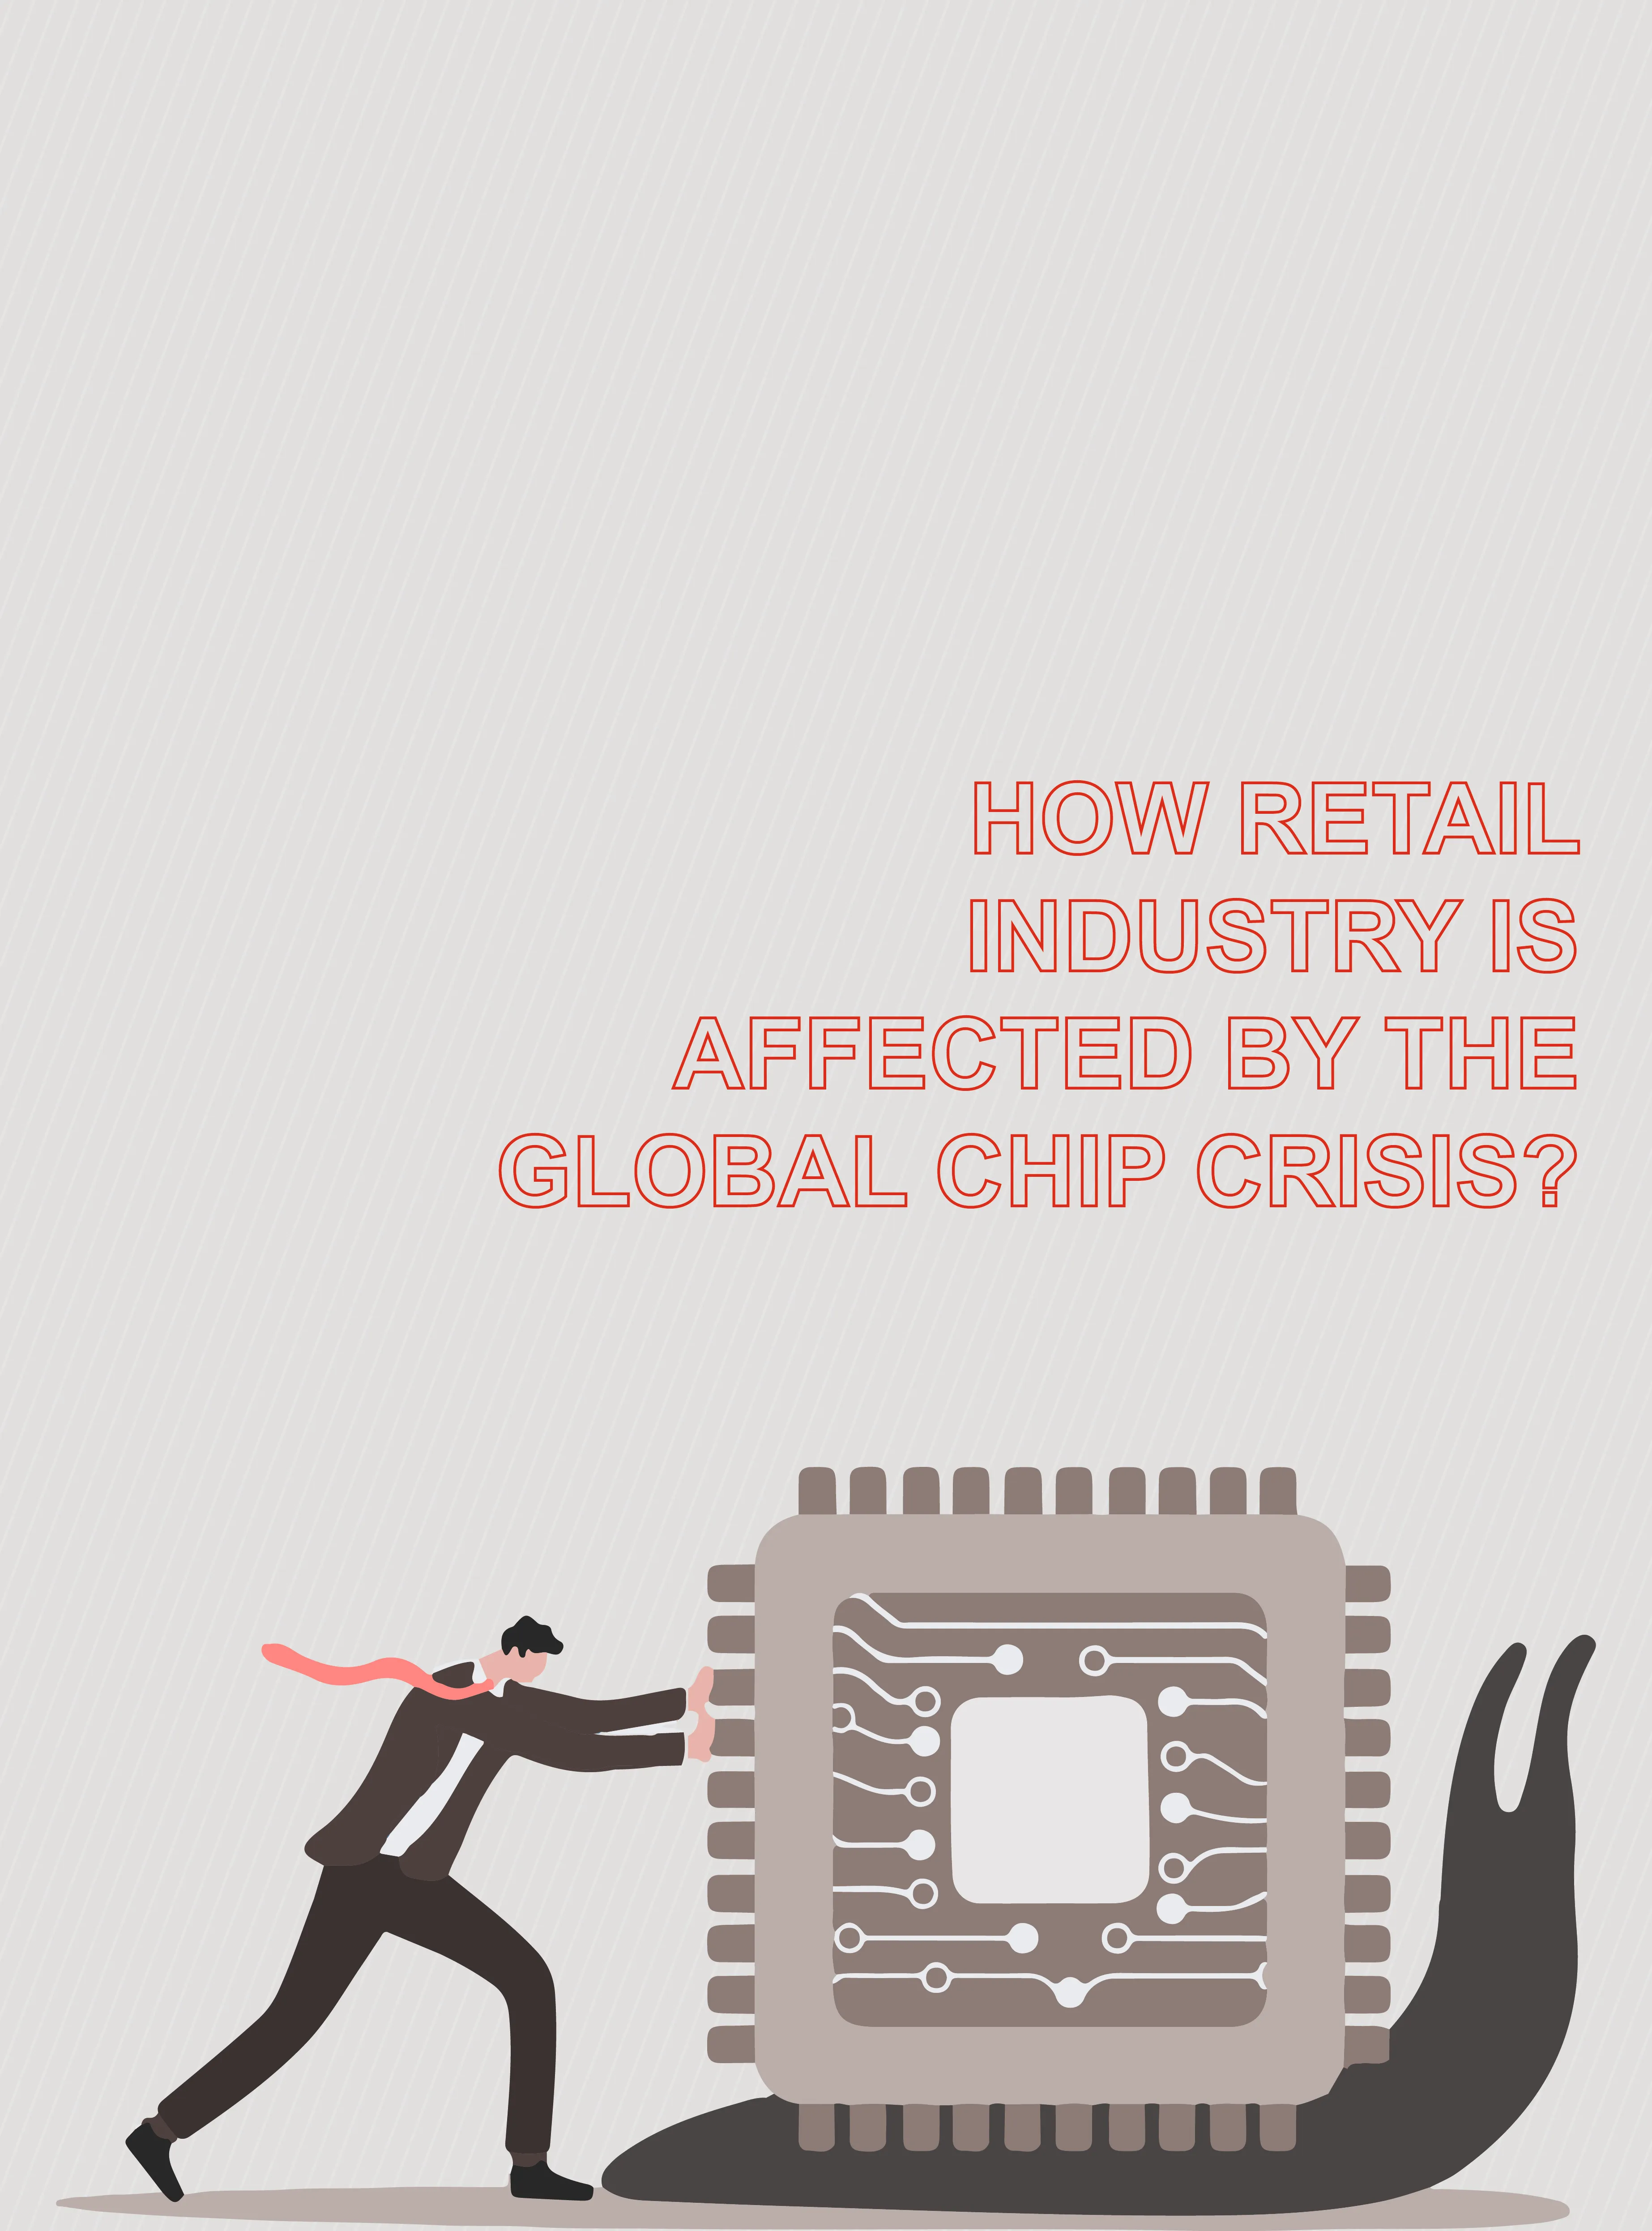 How retail industry is affected by the global chip crisis?